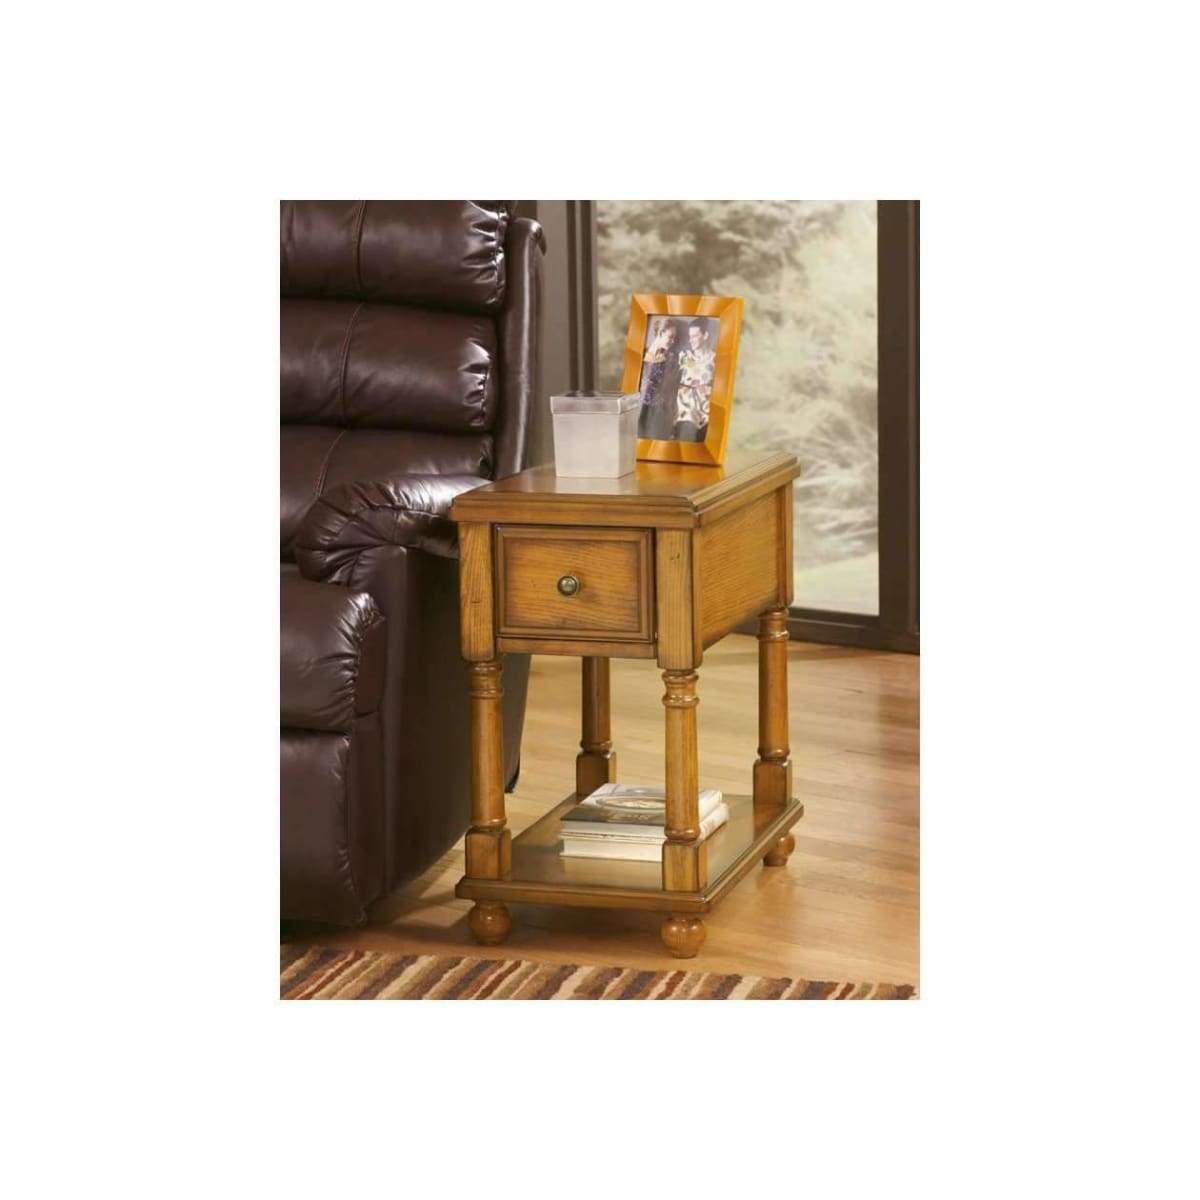 Breegin Light Brown Chairside End Table - END TABLE/SIDE TABLE